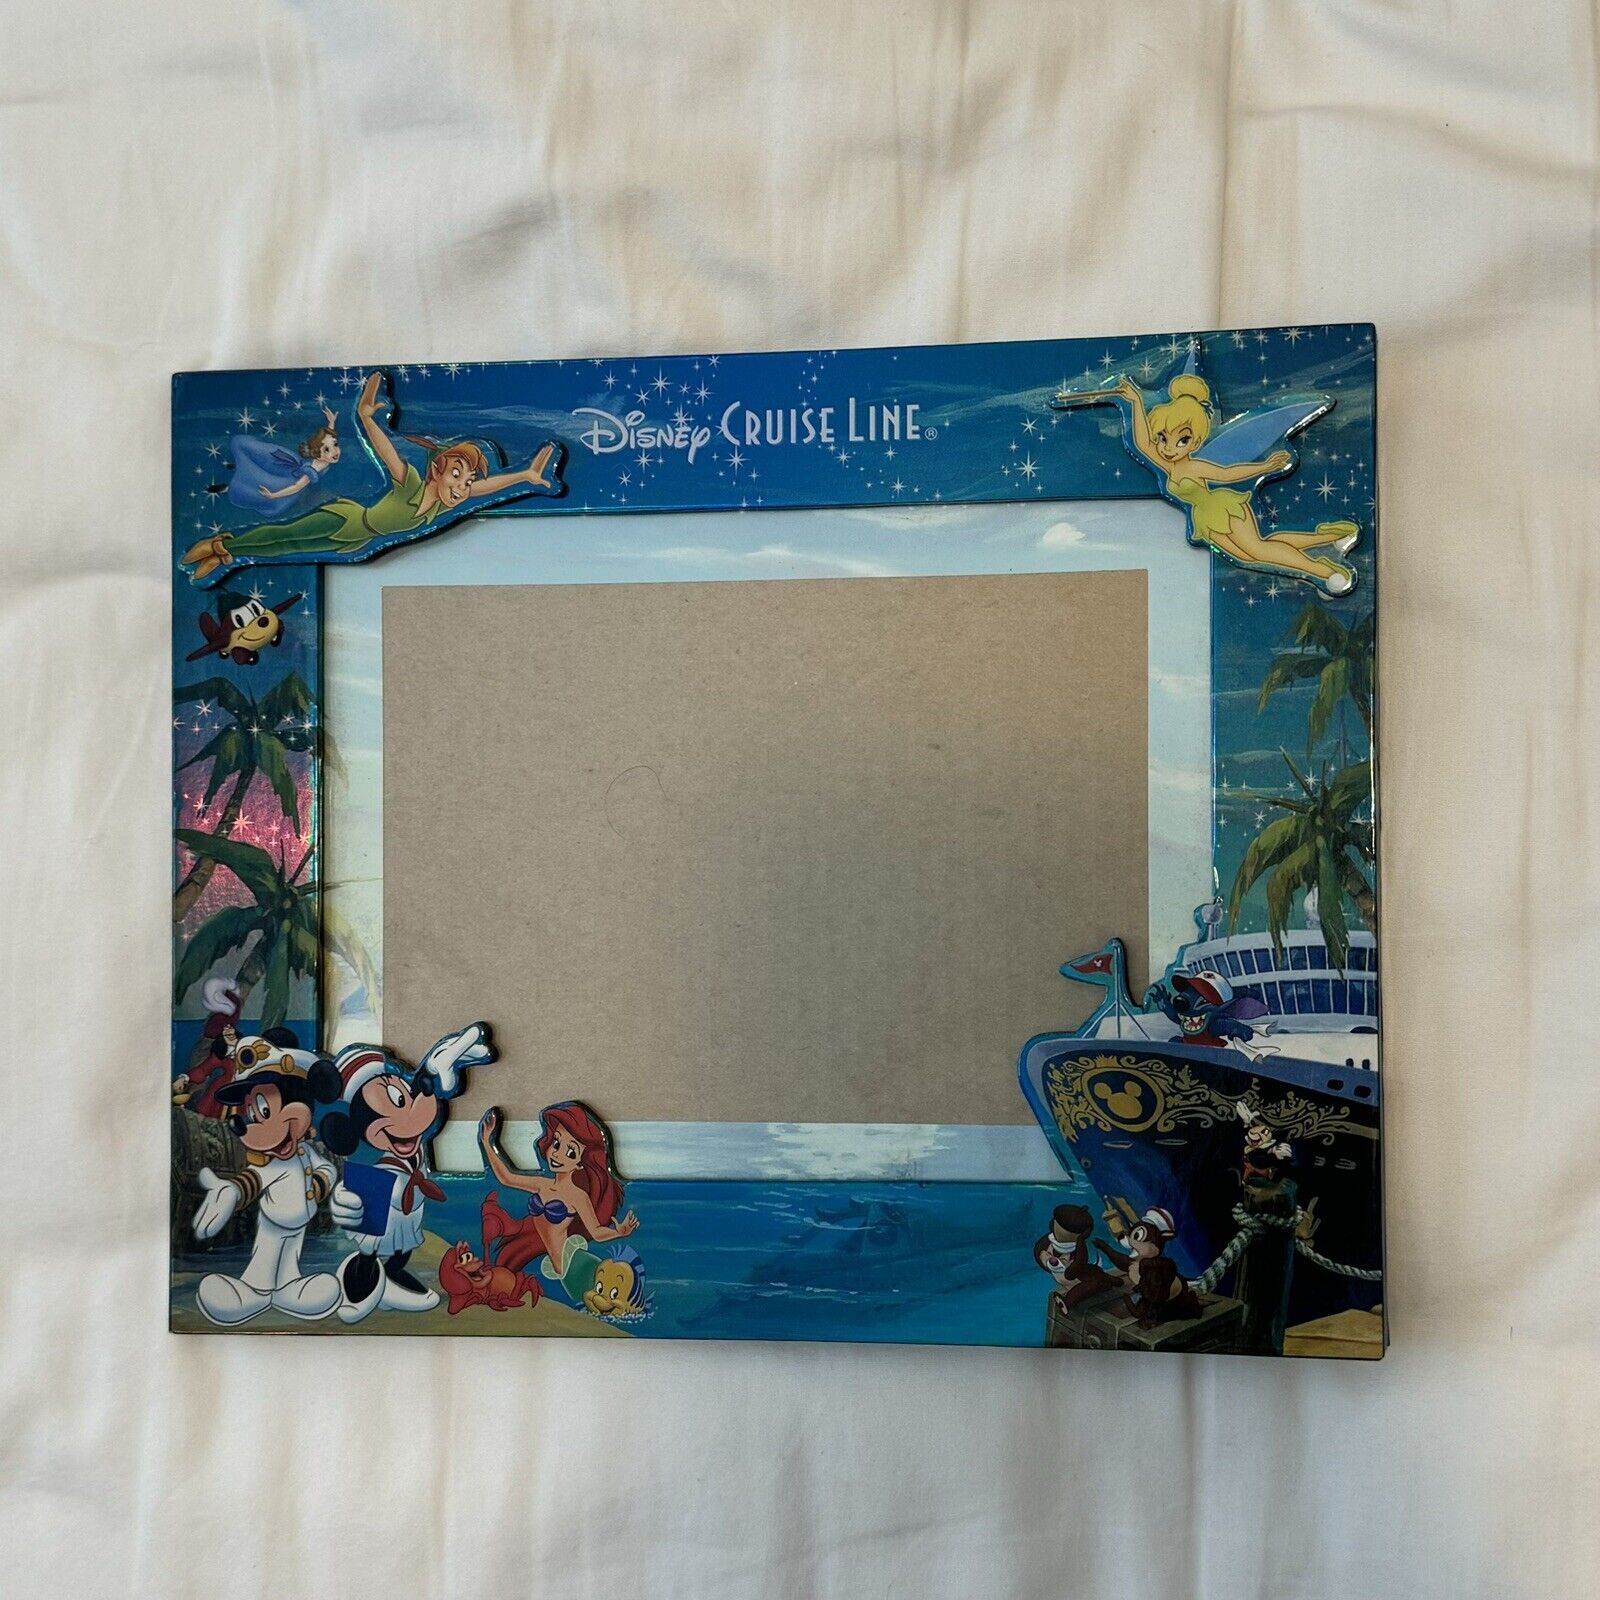 Disney Cruise Line DCL 3D Character Photo Frame